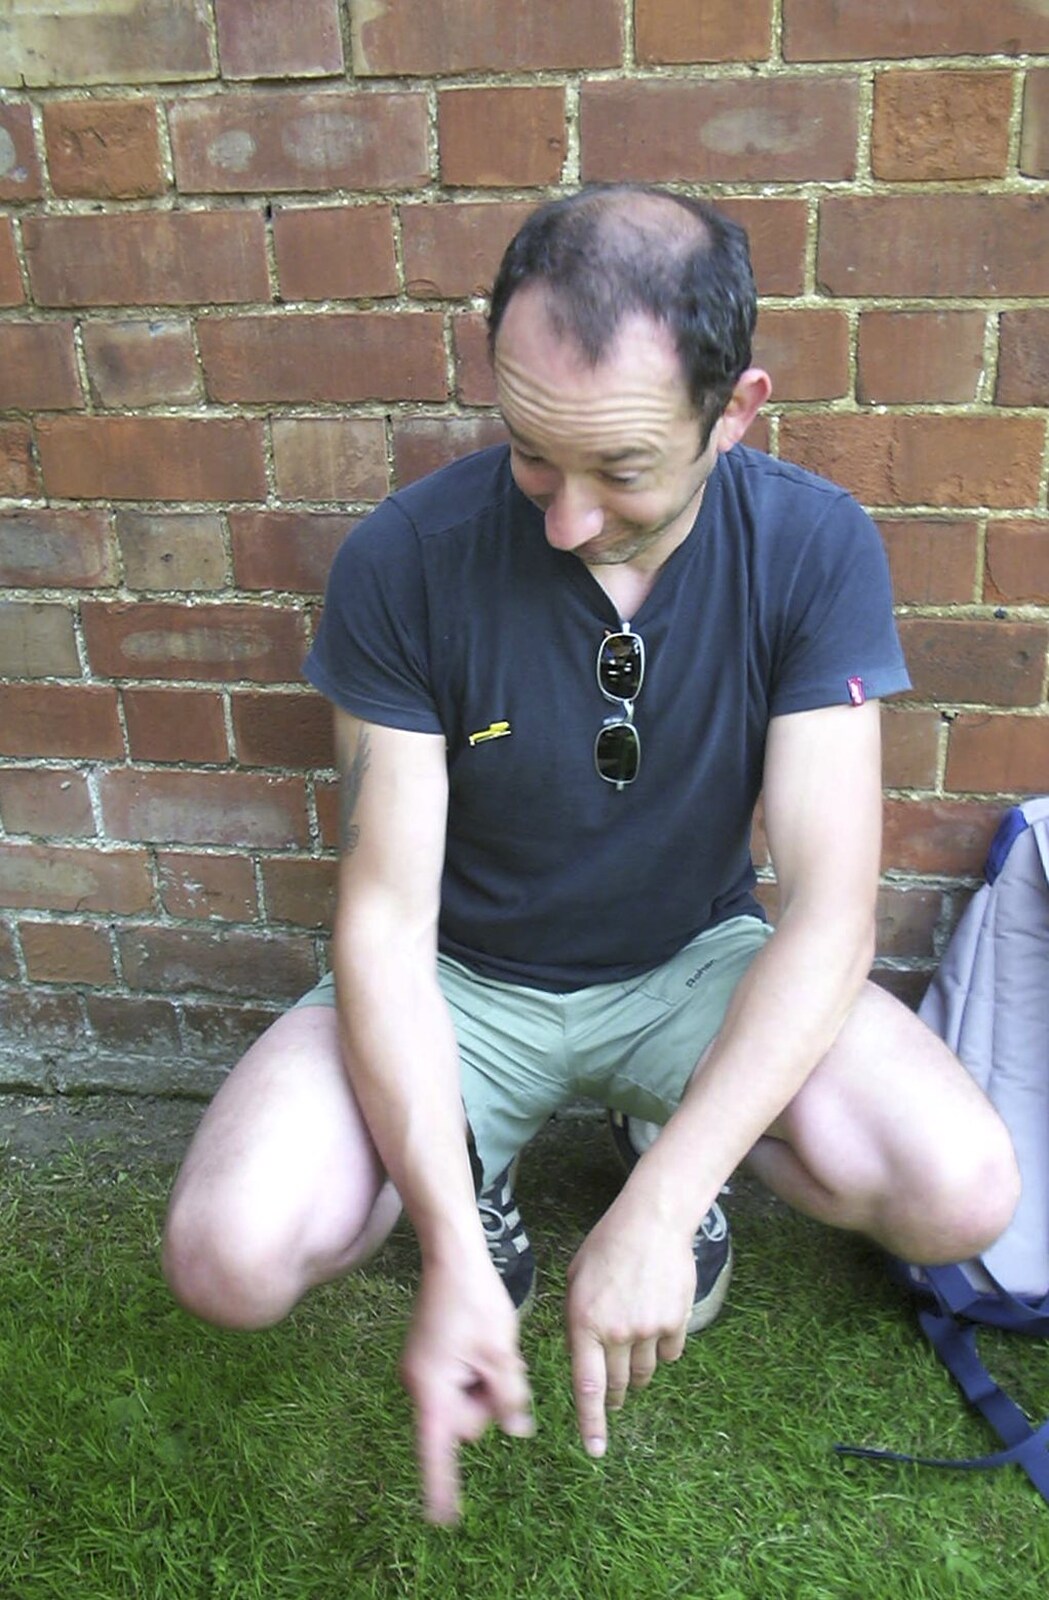 The BSCC Annual Bike Ride, Orford, Suffolk - 12th July 2003: DH points at some grass